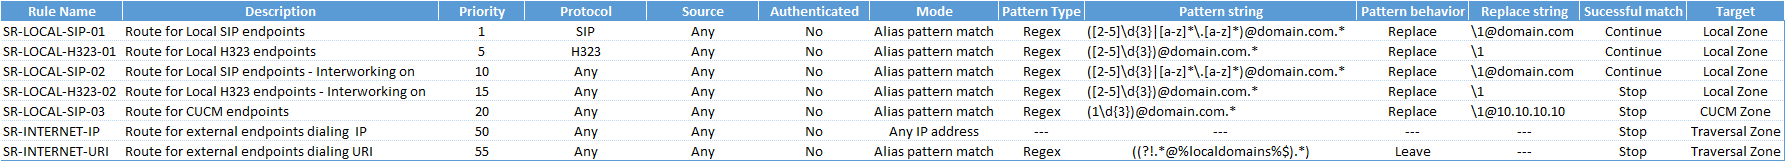 Search rule configuration VCS Control avoid interworking.png